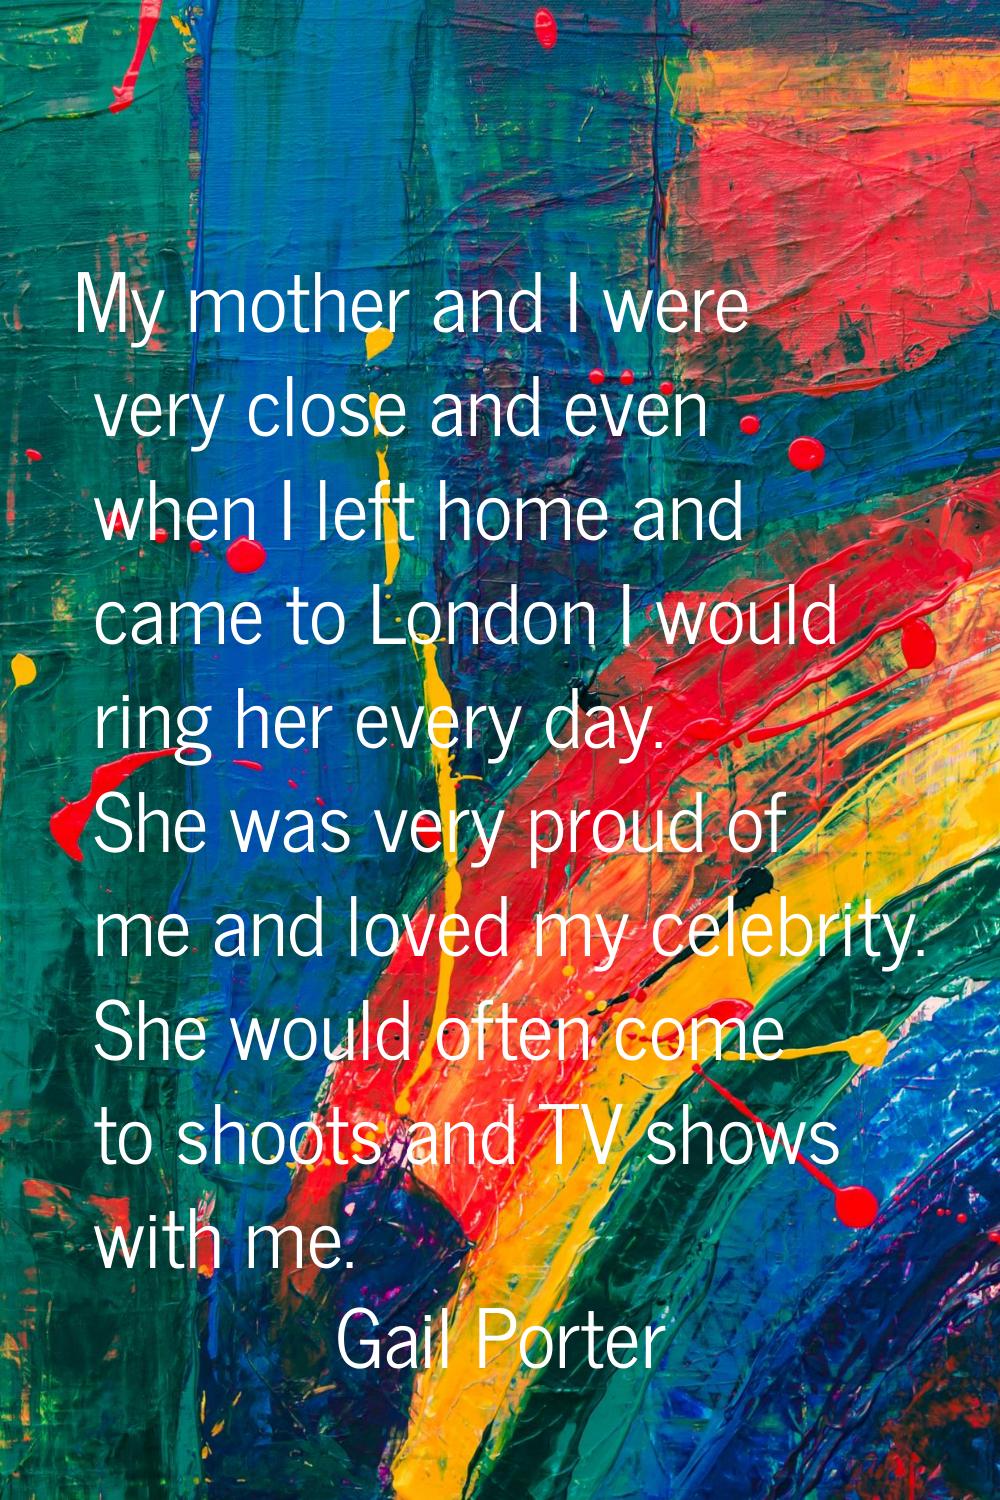 My mother and I were very close and even when I left home and came to London I would ring her every